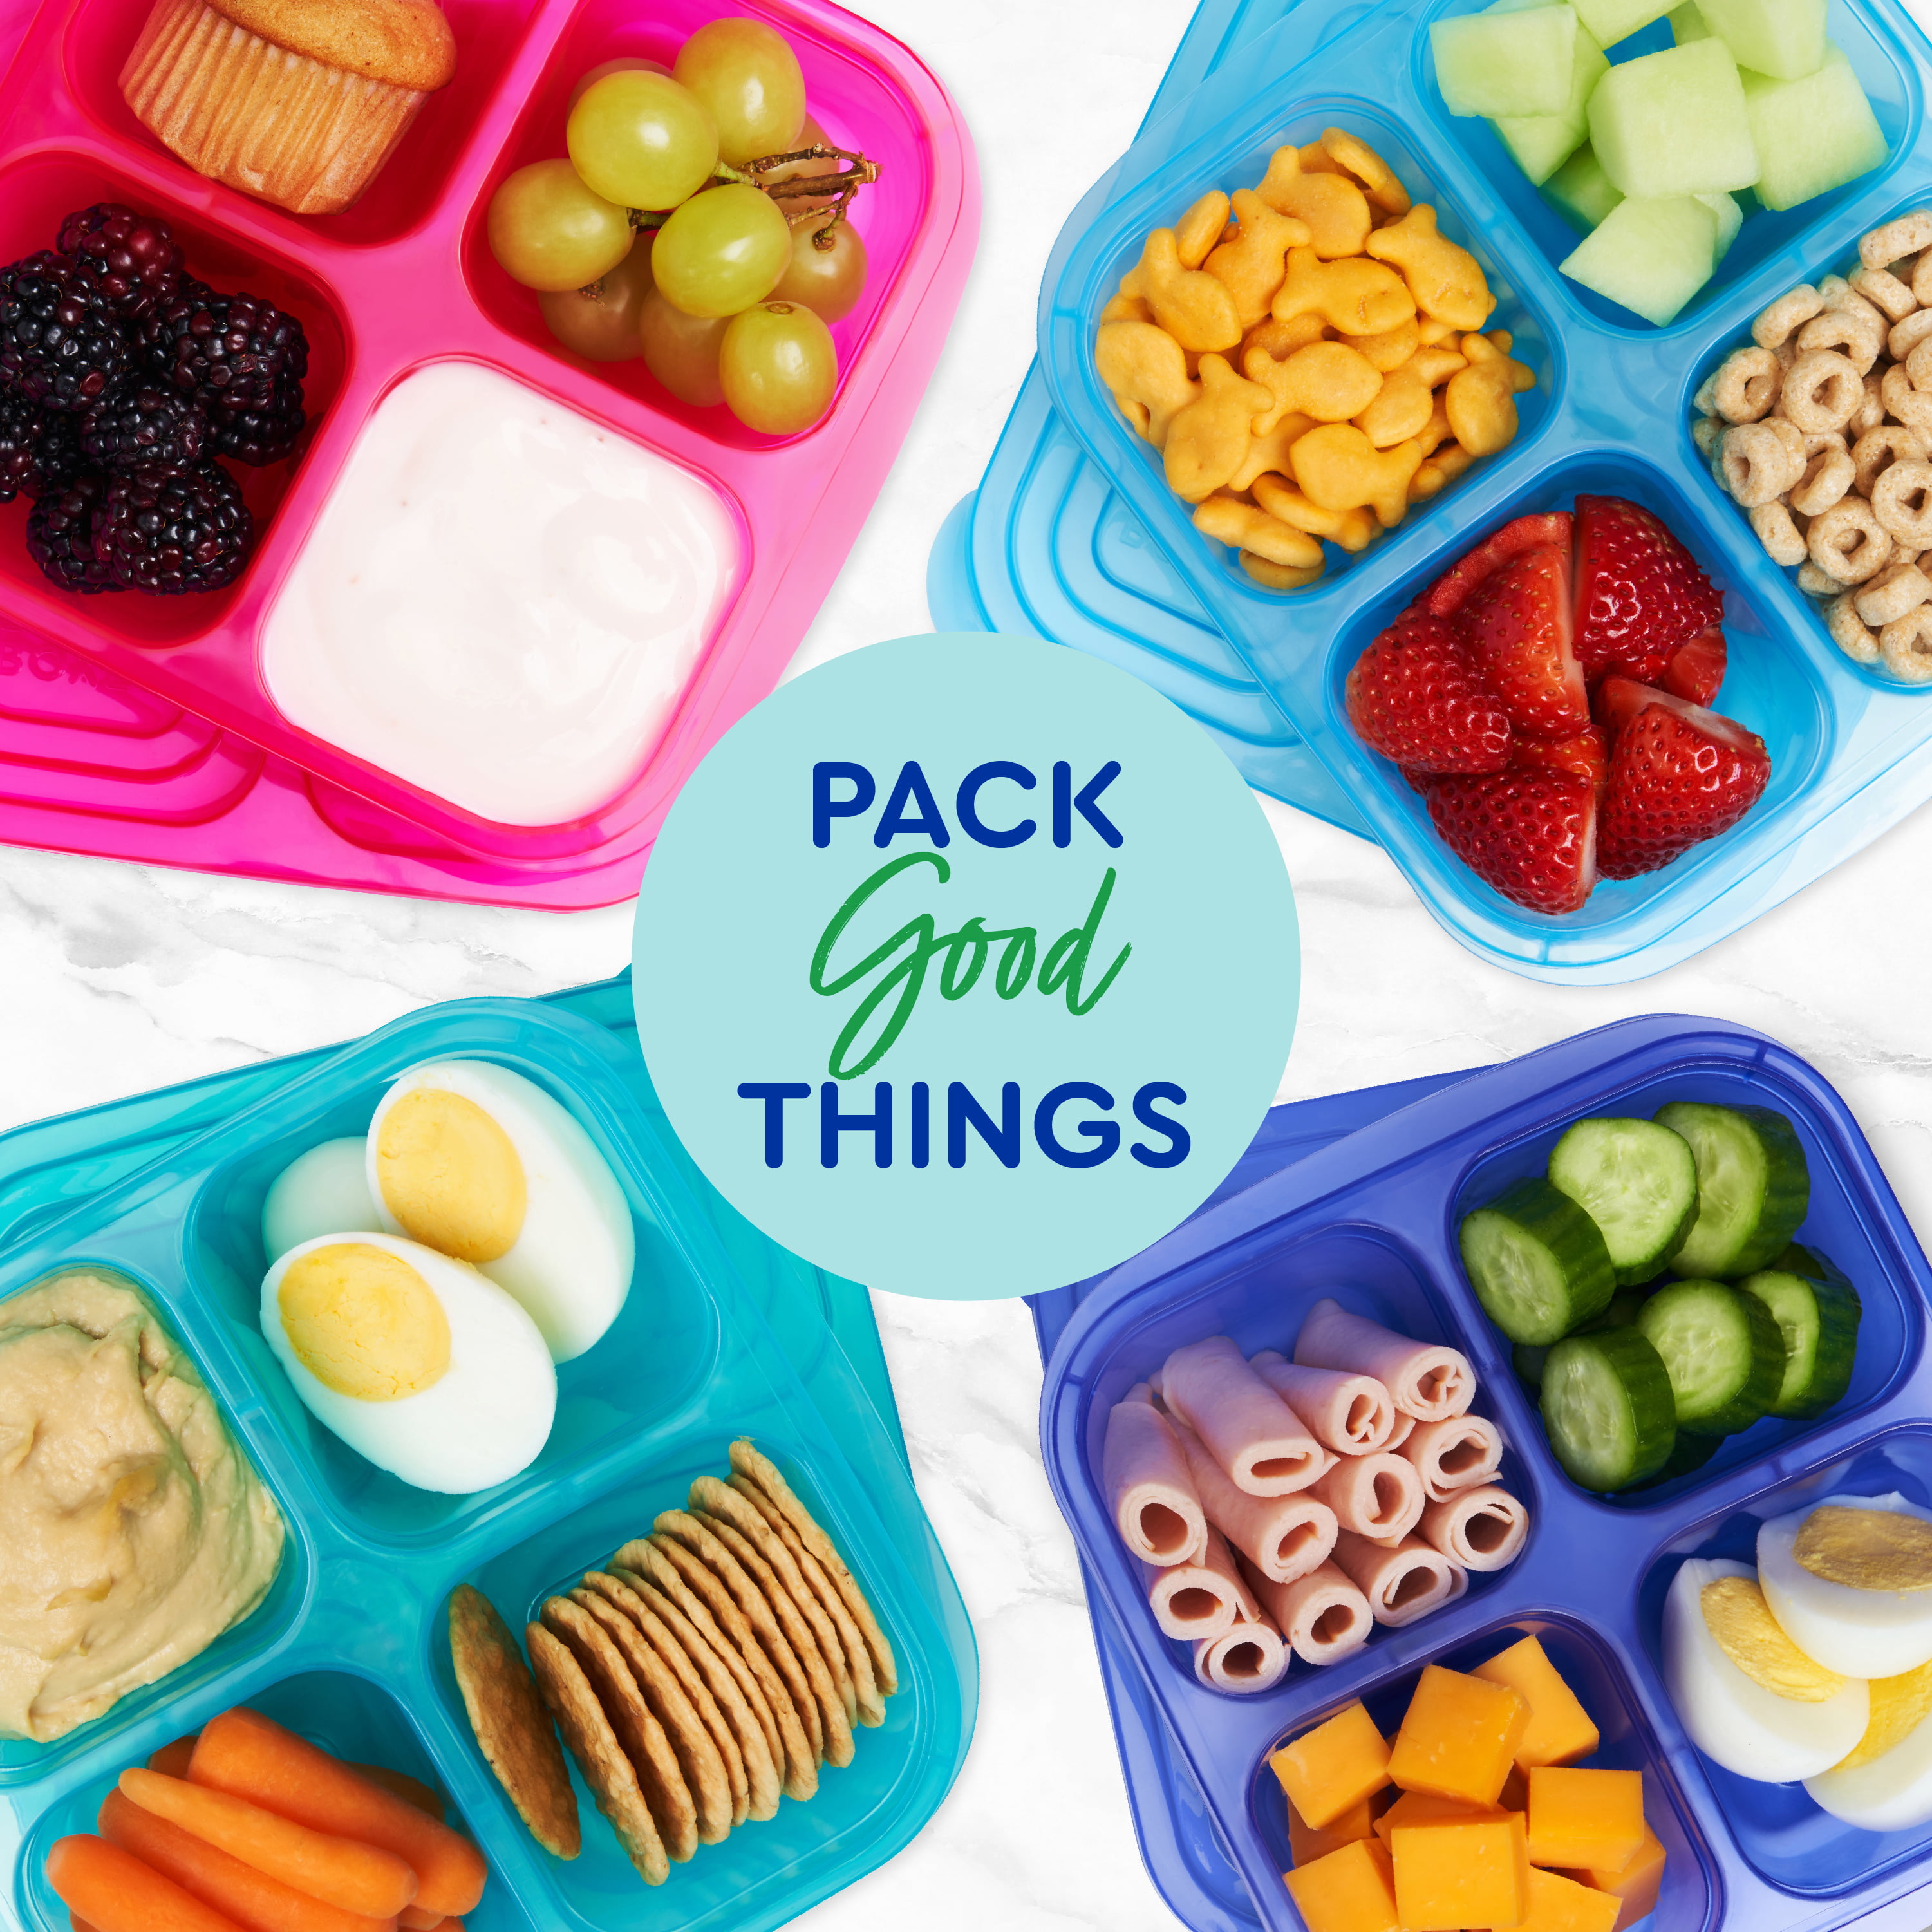 4 Pack Snack Containers, 4 Compartment Divided Snack Container for Kids,  Bento Snack Box for Adults,…See more 4 Pack Snack Containers, 4 Compartment